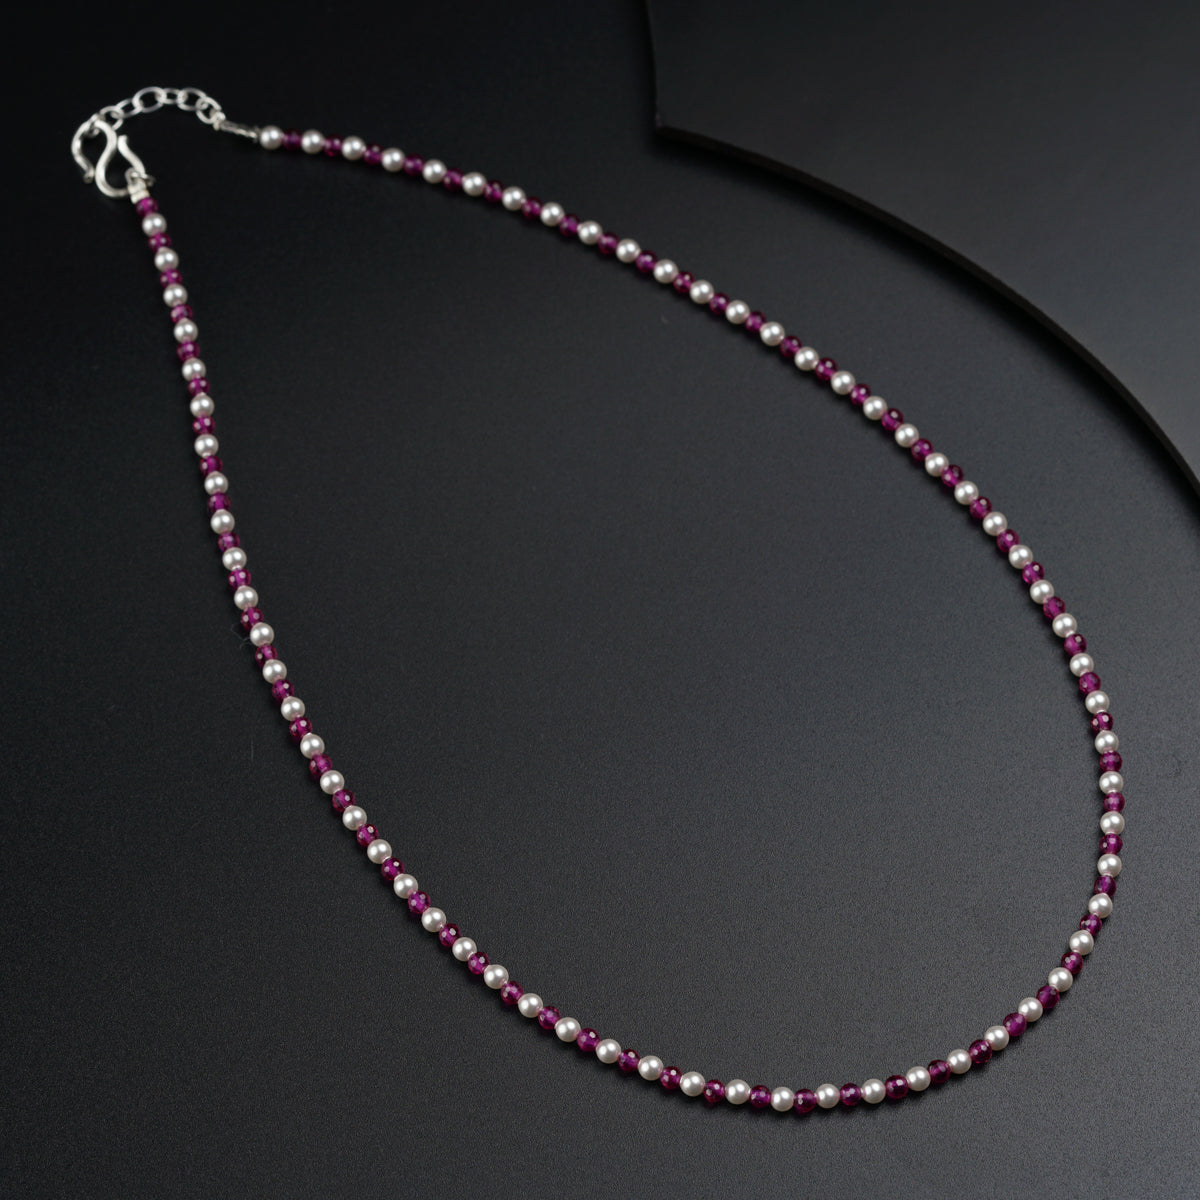 a necklace with pink beads on a black surface